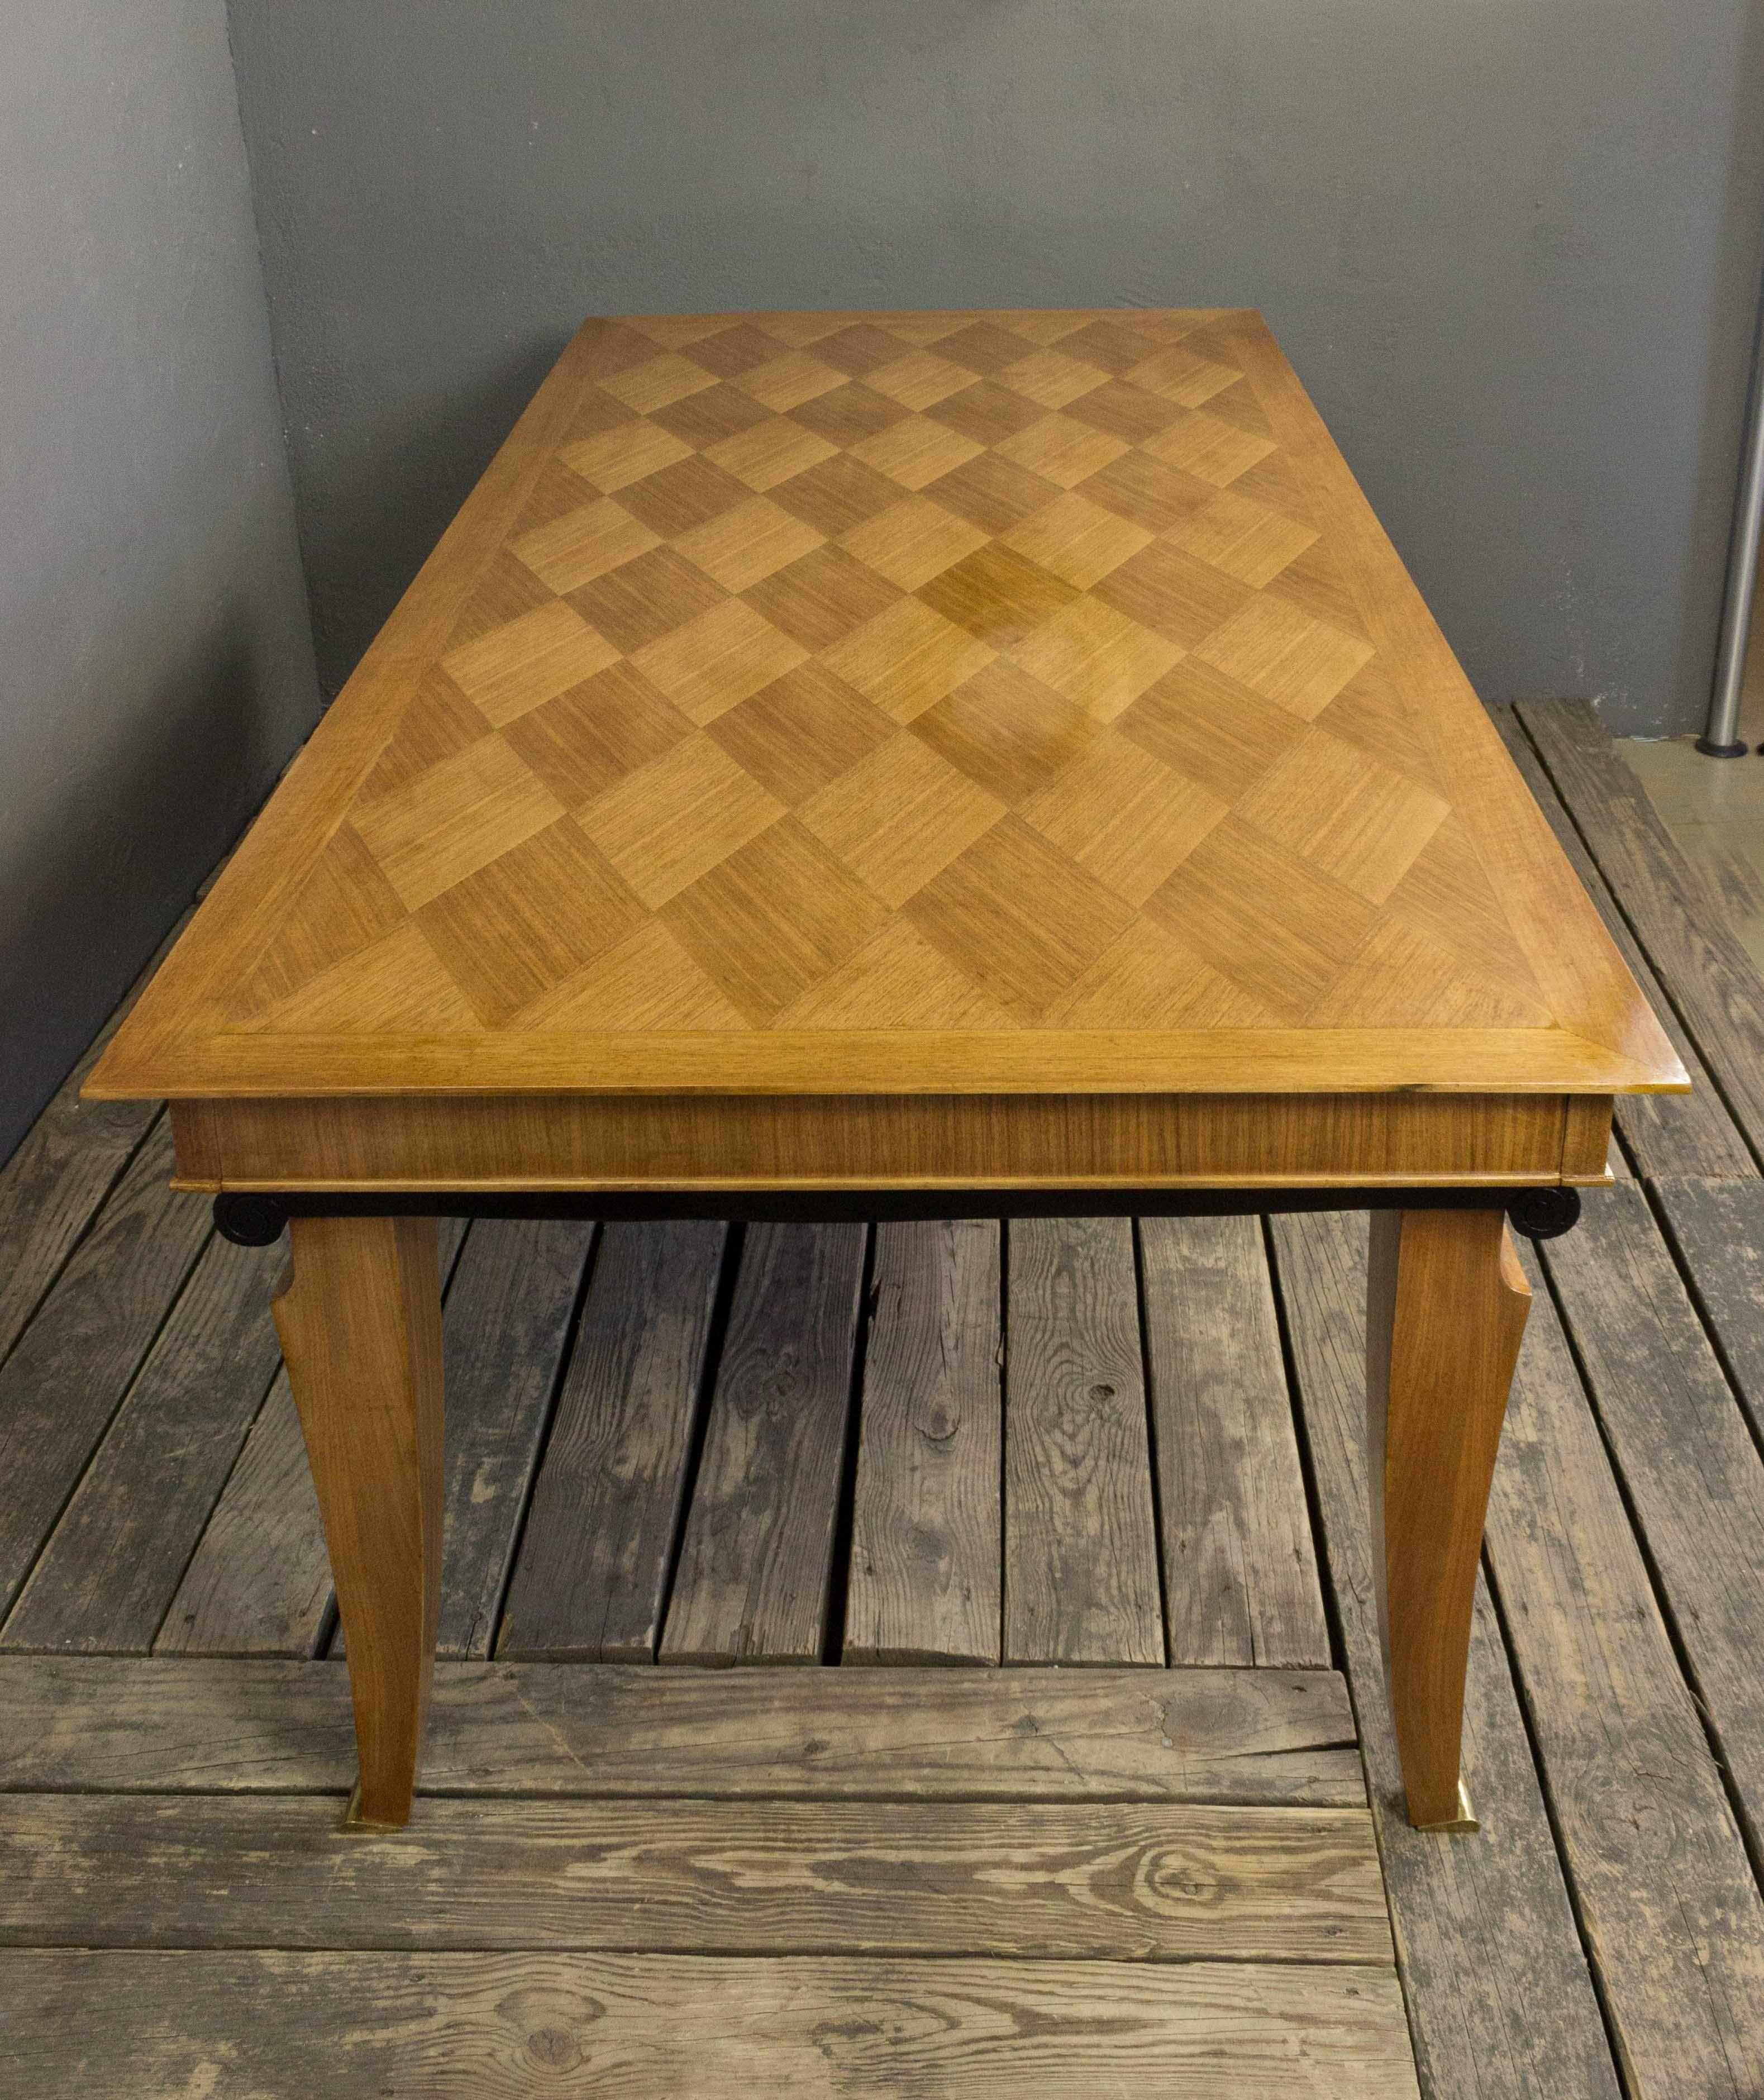 This French mahogany veneered dining table is a stunning piece of Art Deco furniture from the 1940s. The basket weave marquetry top is a true work of art, and the ebonized highlights add a touch of elegance to the overall design. The legs are